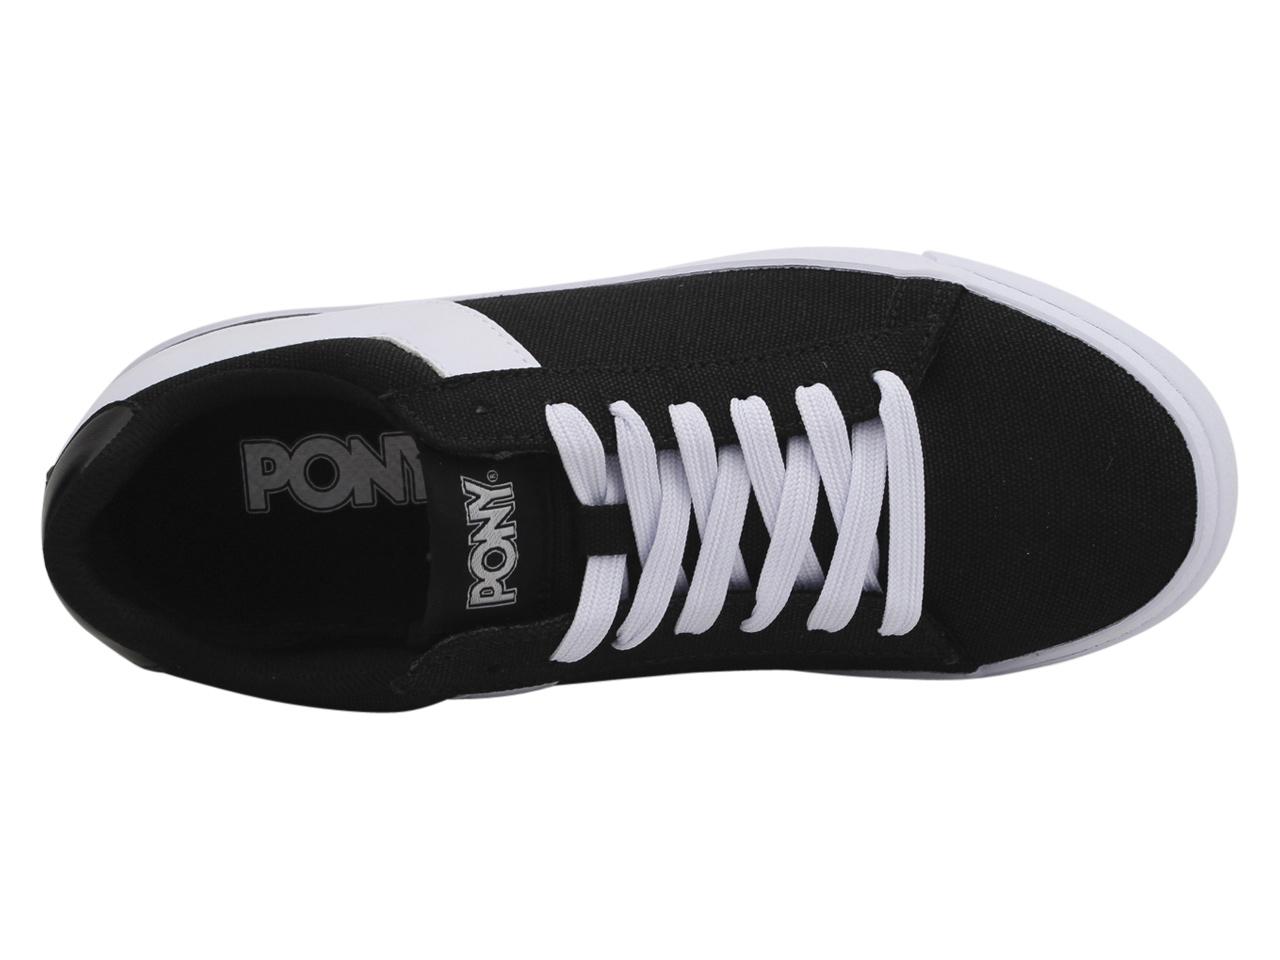 Pony Top Star Womens Lo Core Black White Canvas Shoes Sneakers Size 6.5 M  RETRO